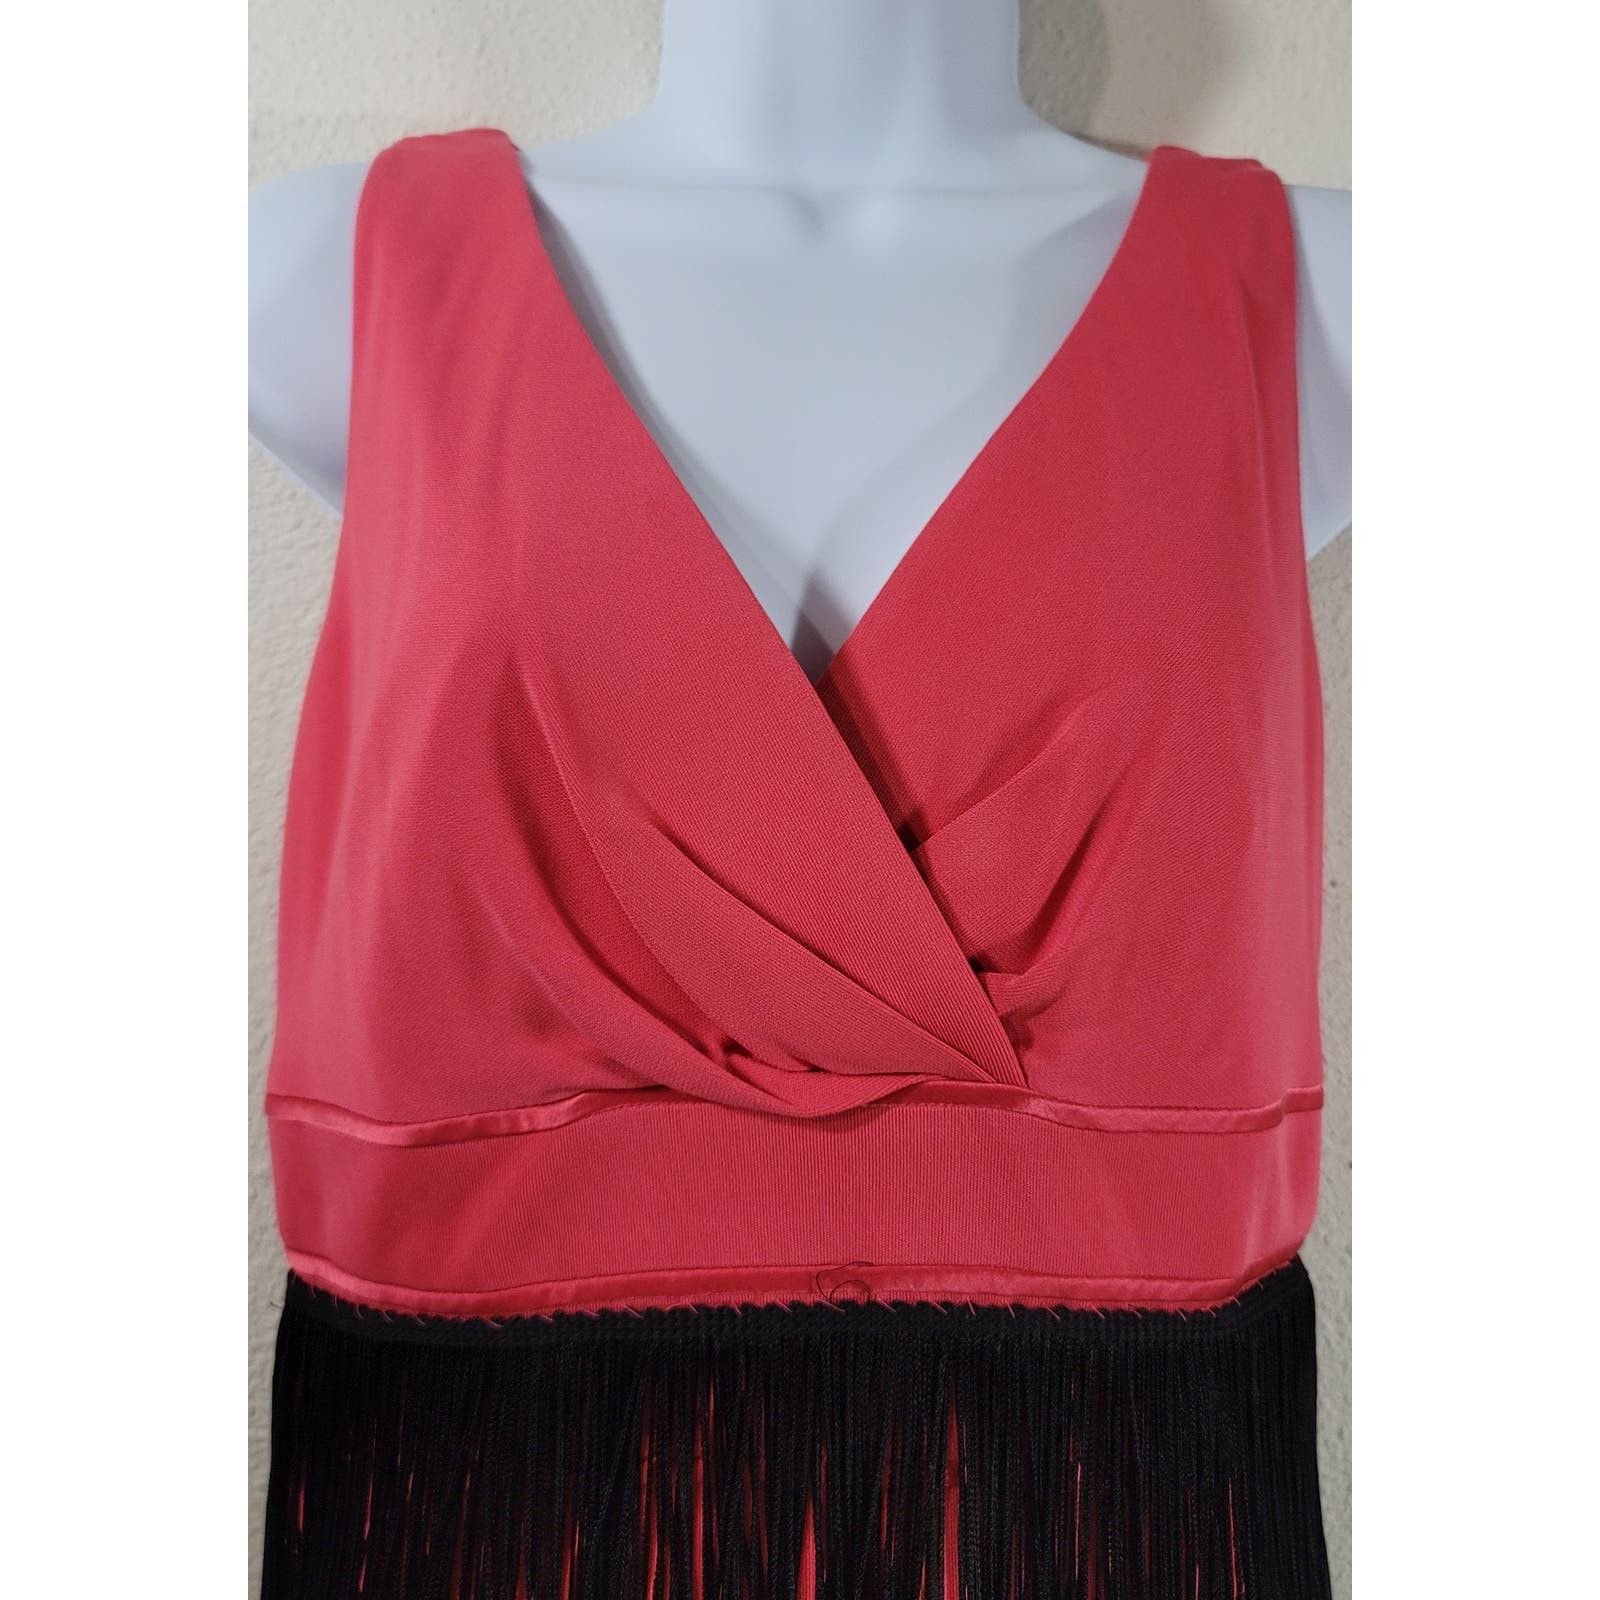 Other Kay Unger Coral Crisscross Bodice Fringe Skirt Dress 6 Size M / US 6-8 / IT 42-44 - 5 Preview